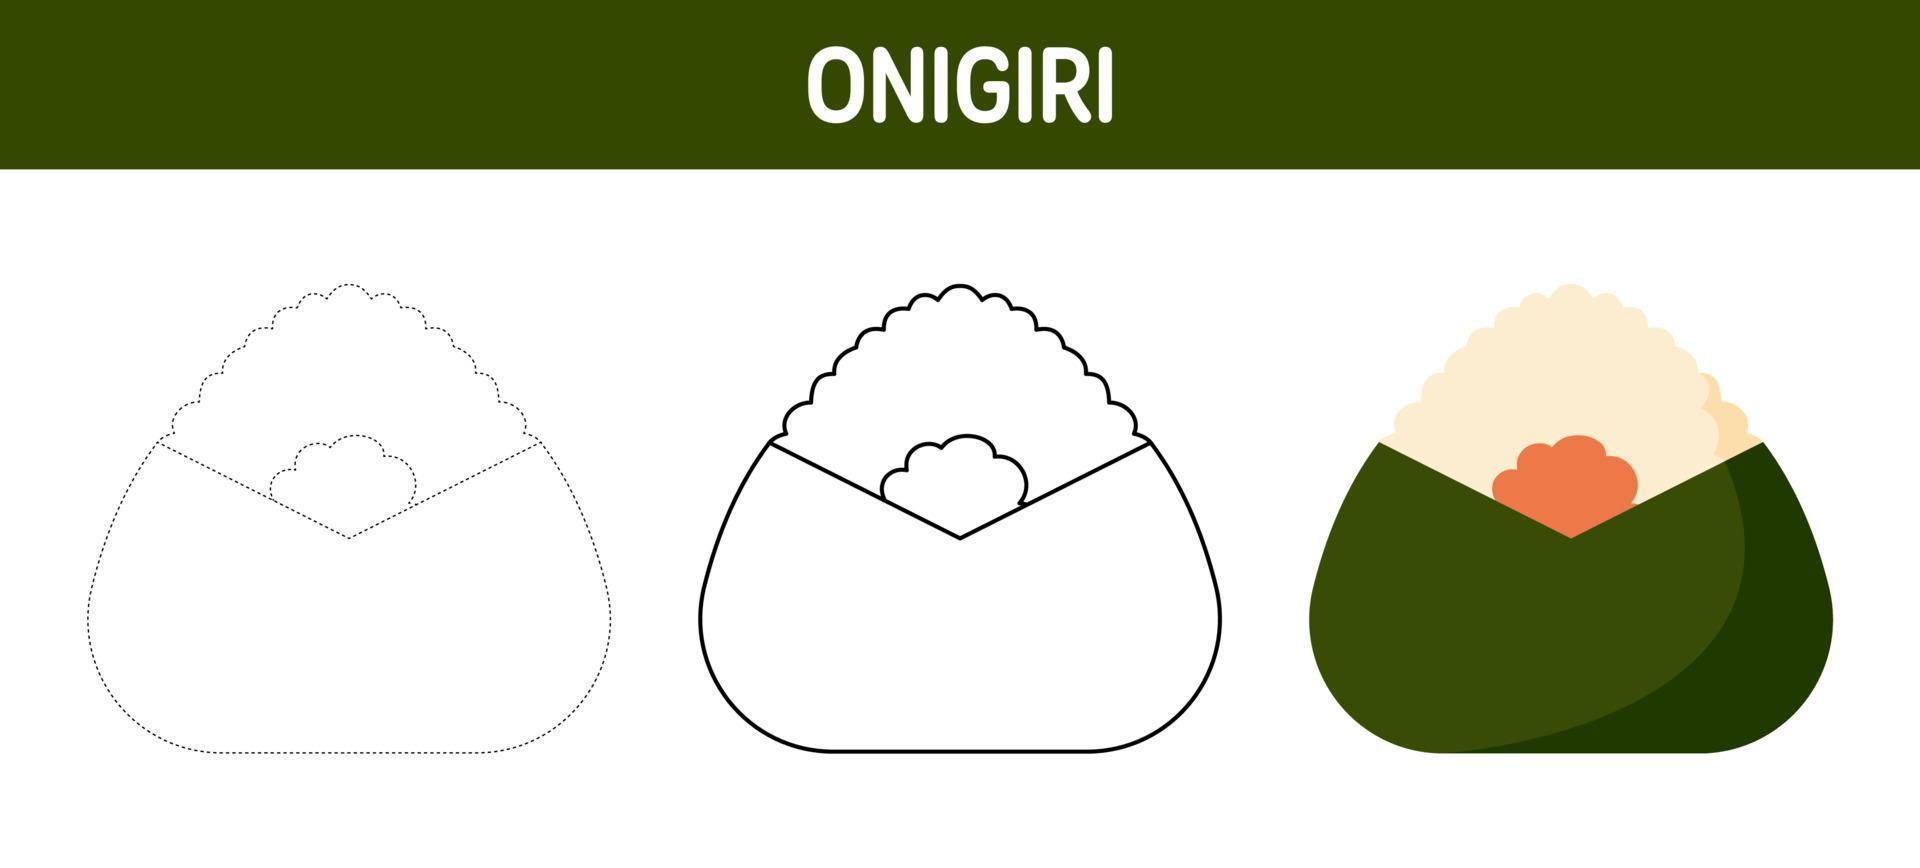 Onigiri tracing and coloring worksheet for kids vector